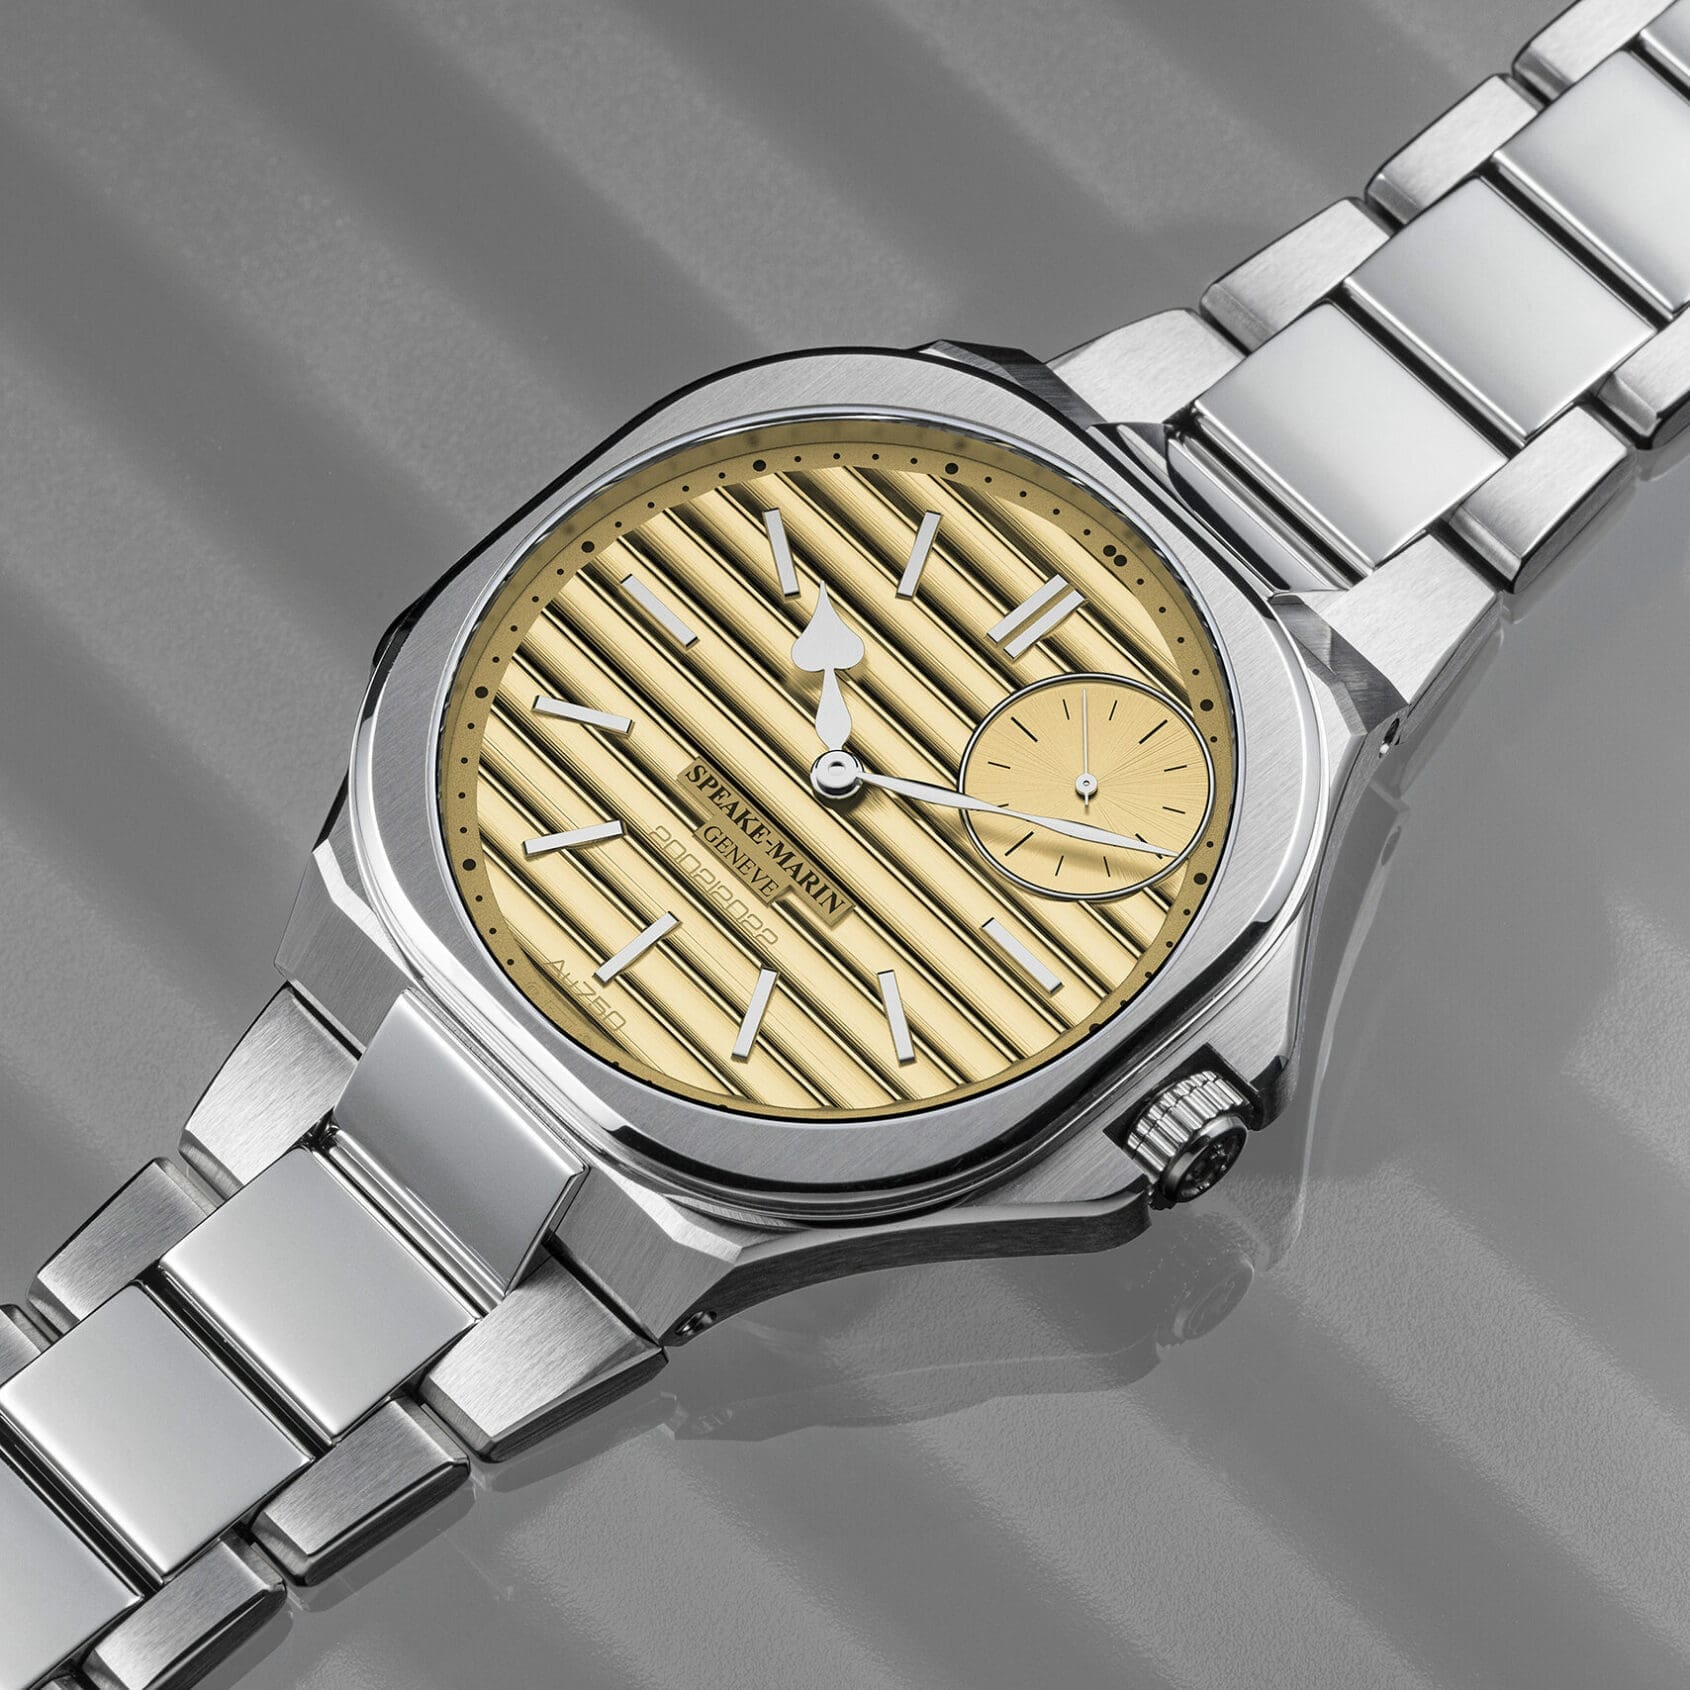 Speake-Marin celebrates their 20th anniversary with a gold dial Ripples Anniversary Edition